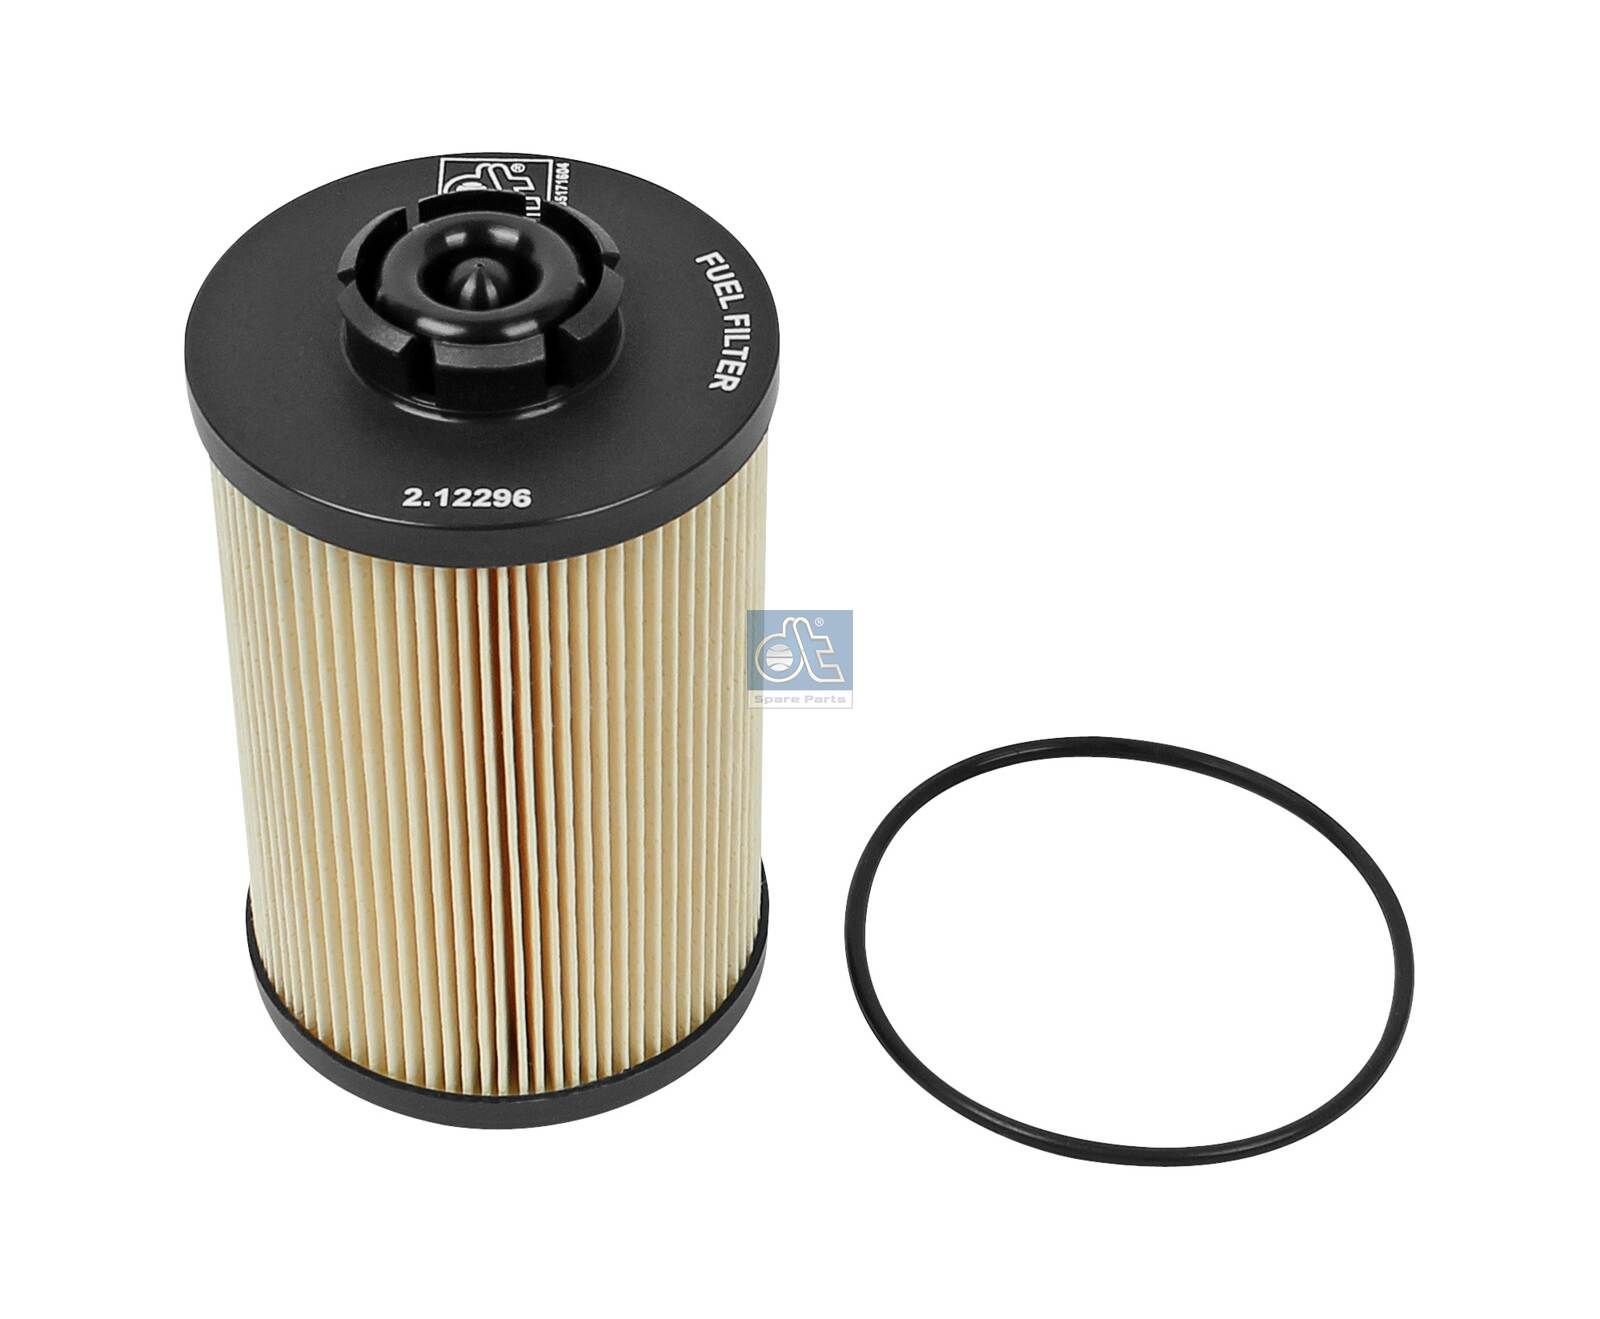 PU 1058X DT Spare Parts 2.12296 Fuel filter 0293 1748